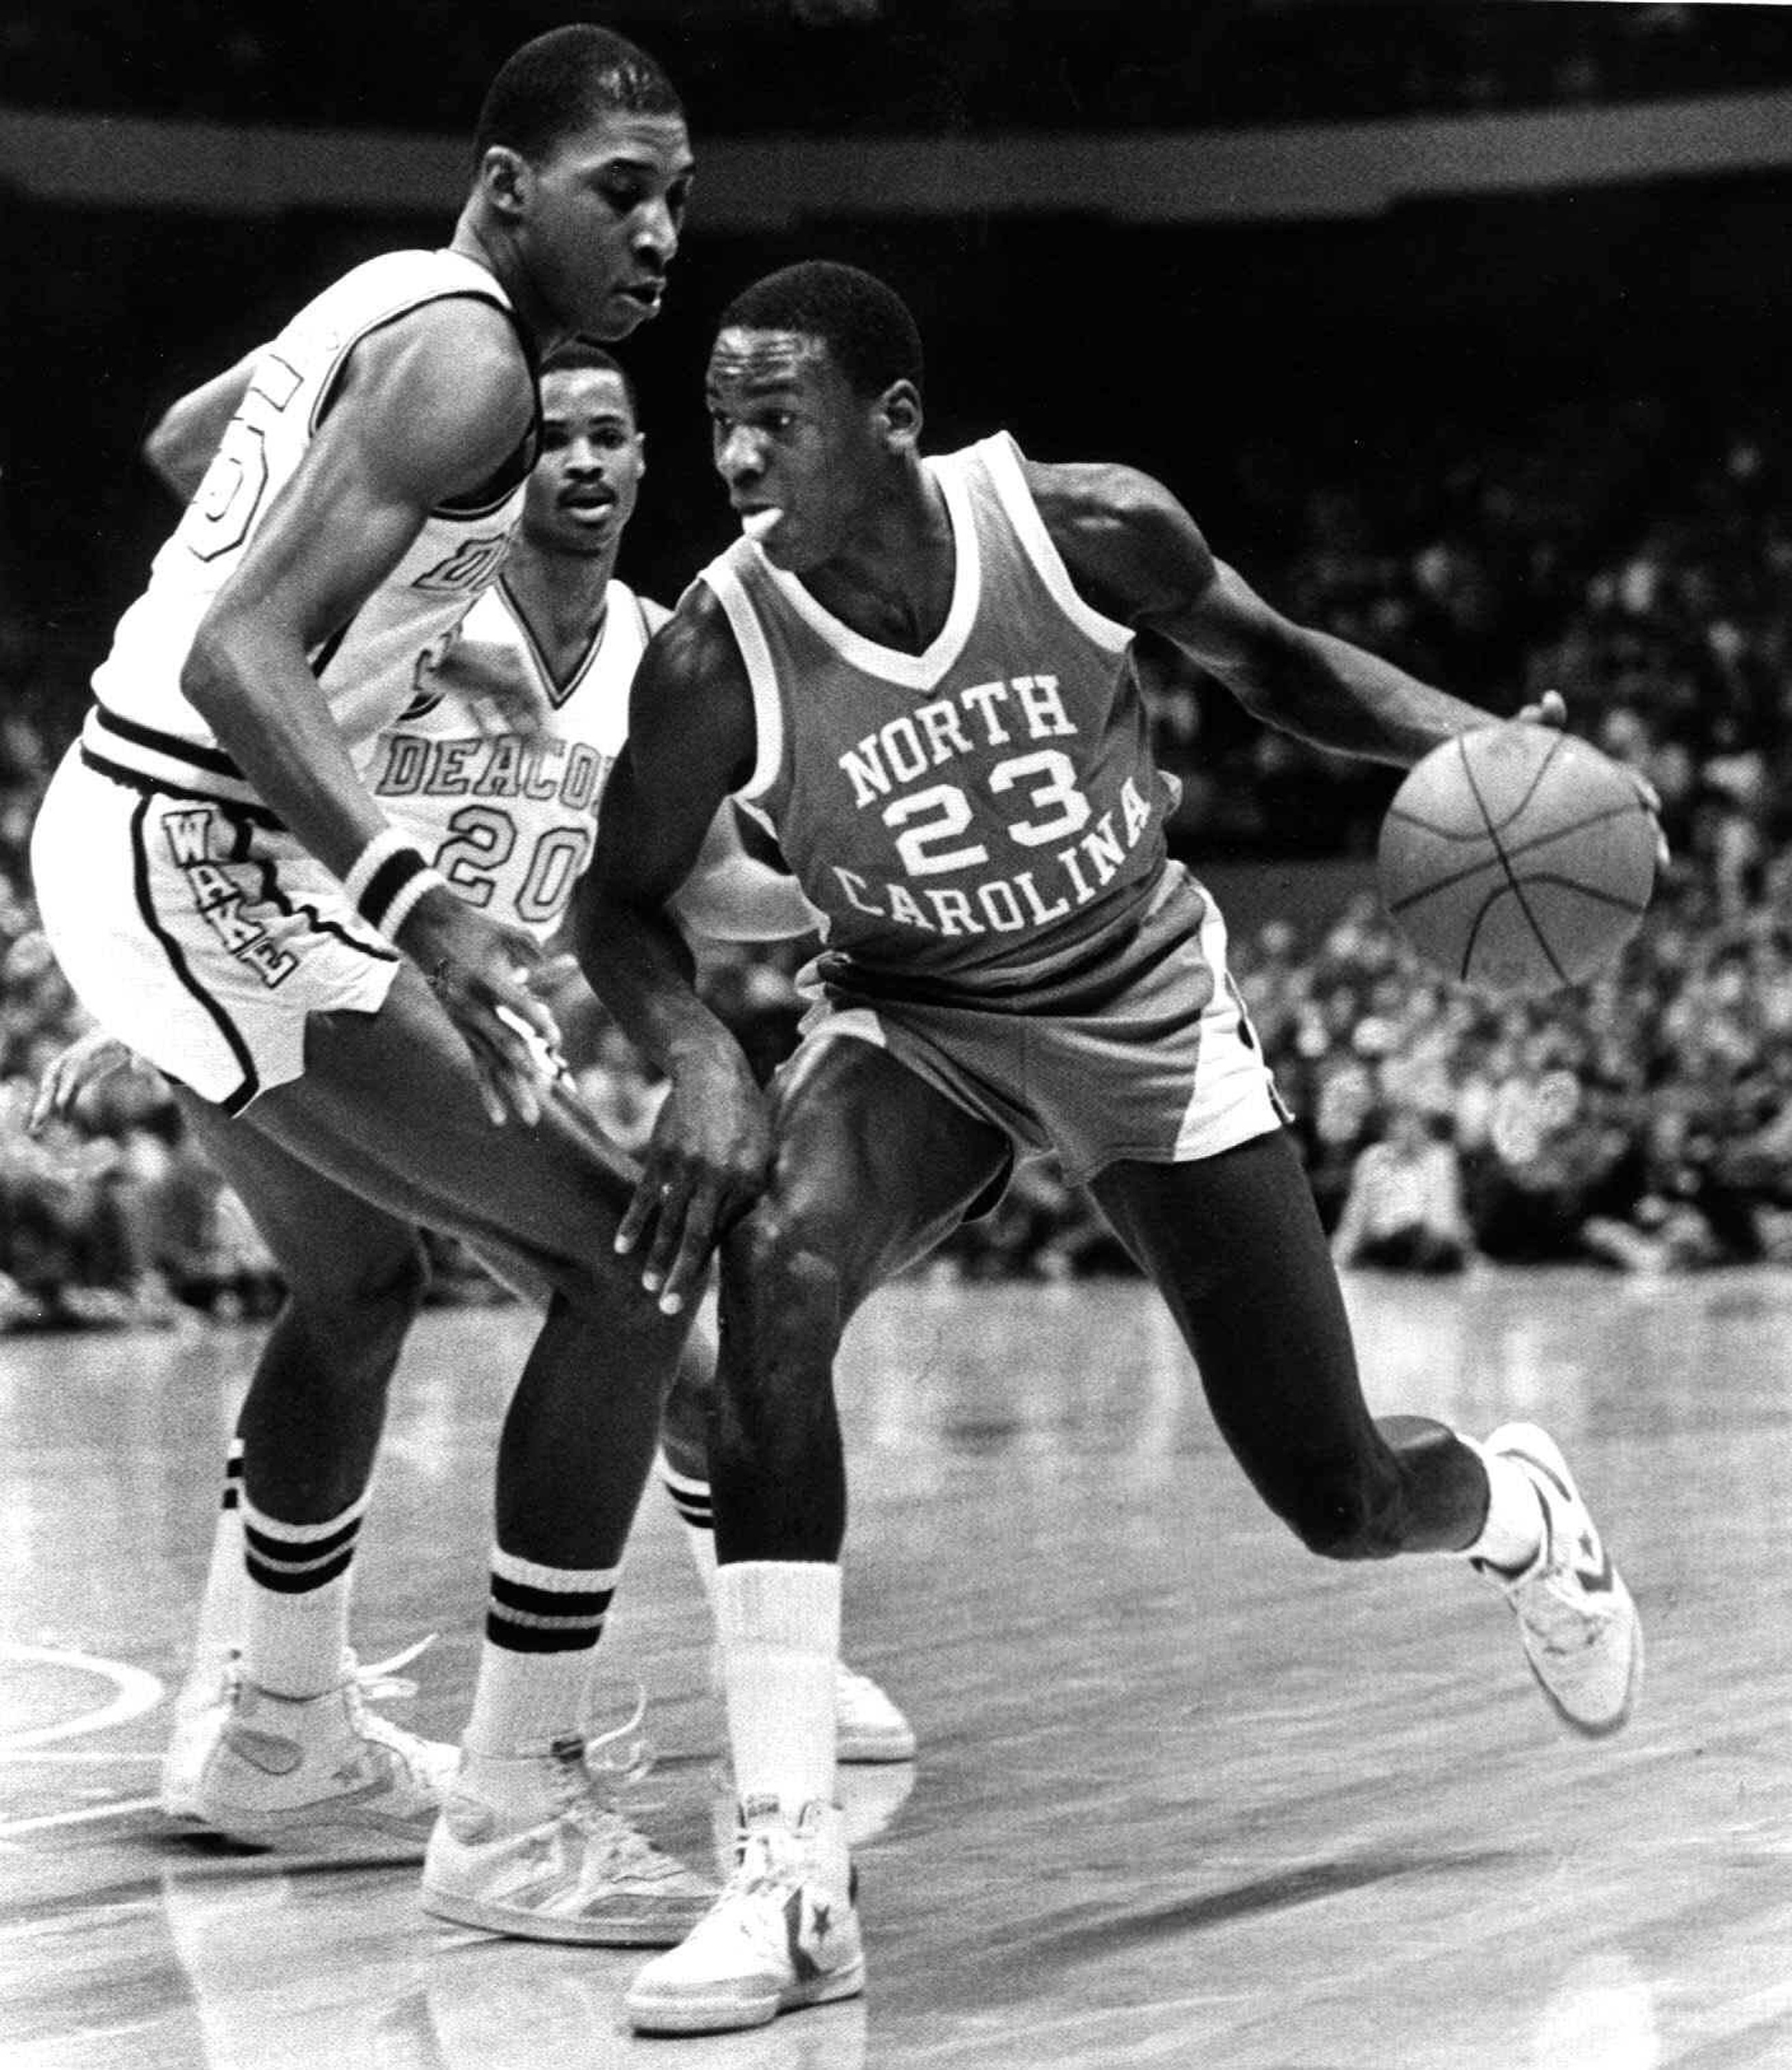 The UNC basketball player with Michael Jordan's number before MJ